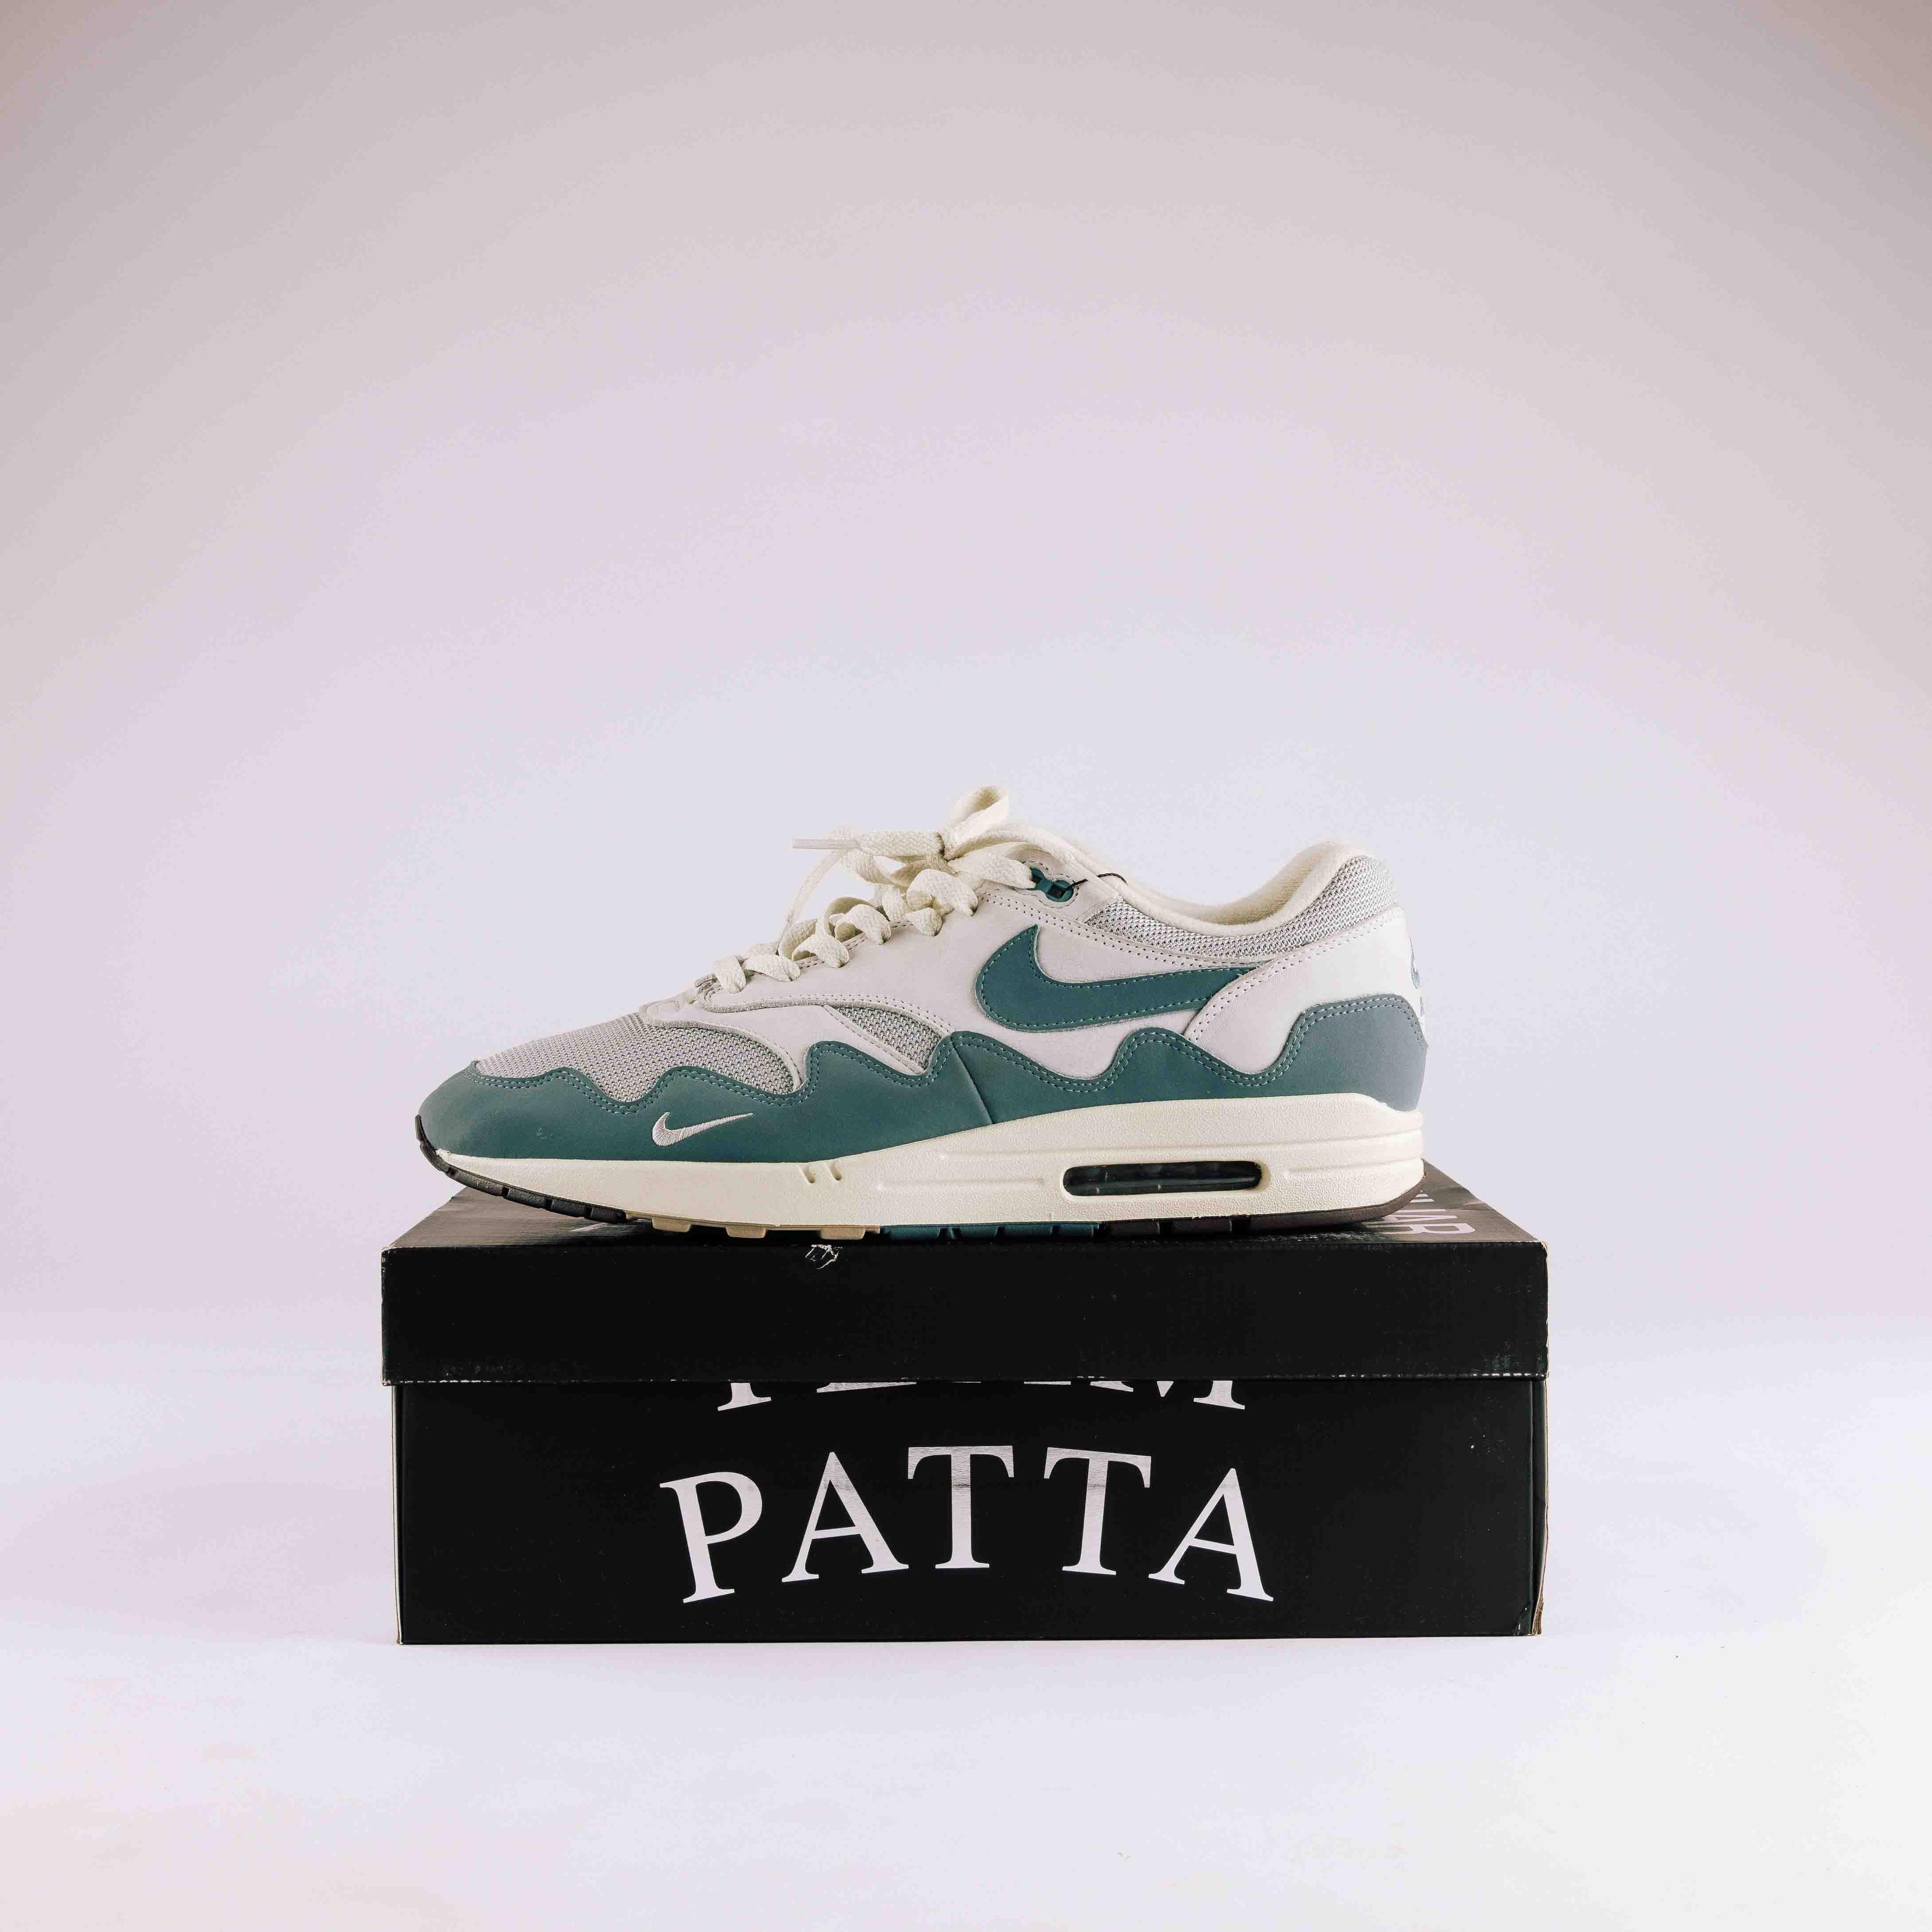 Alternate View 4 of Nike Air Max 1 Patta Waves Noise Aqua (without Bracelet) (Used)